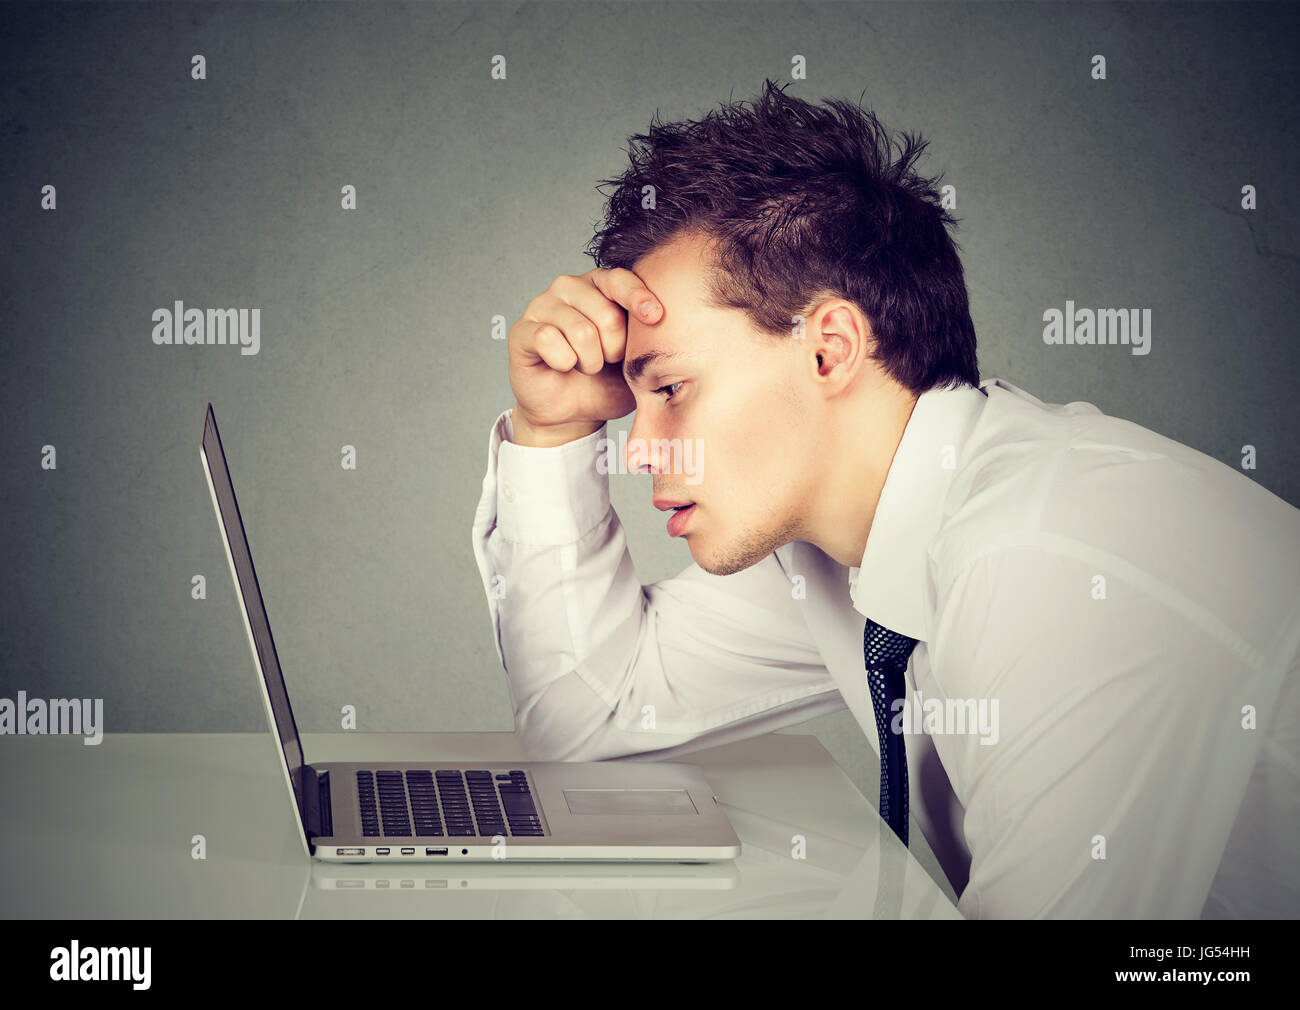 Unhappy stressed sad man sitting at desk in front of his laptop Stock Photo